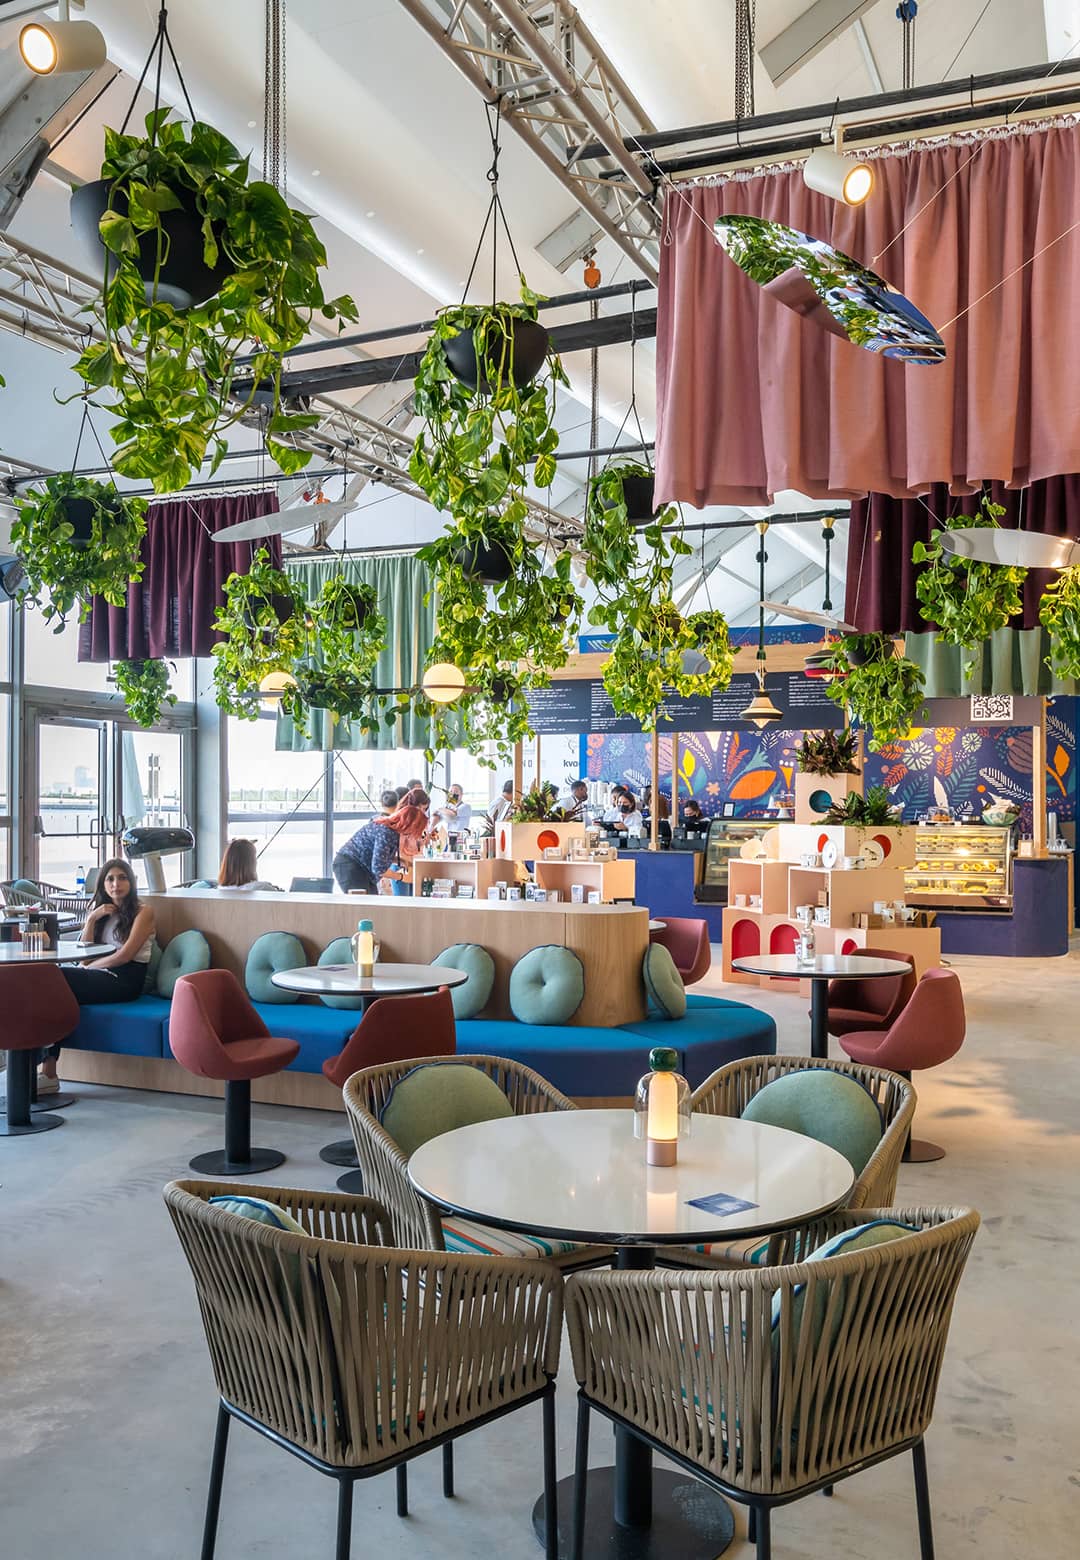 The Lighthouse Café in Dubai served as the ultimate dining hub at Downtown Design 2021